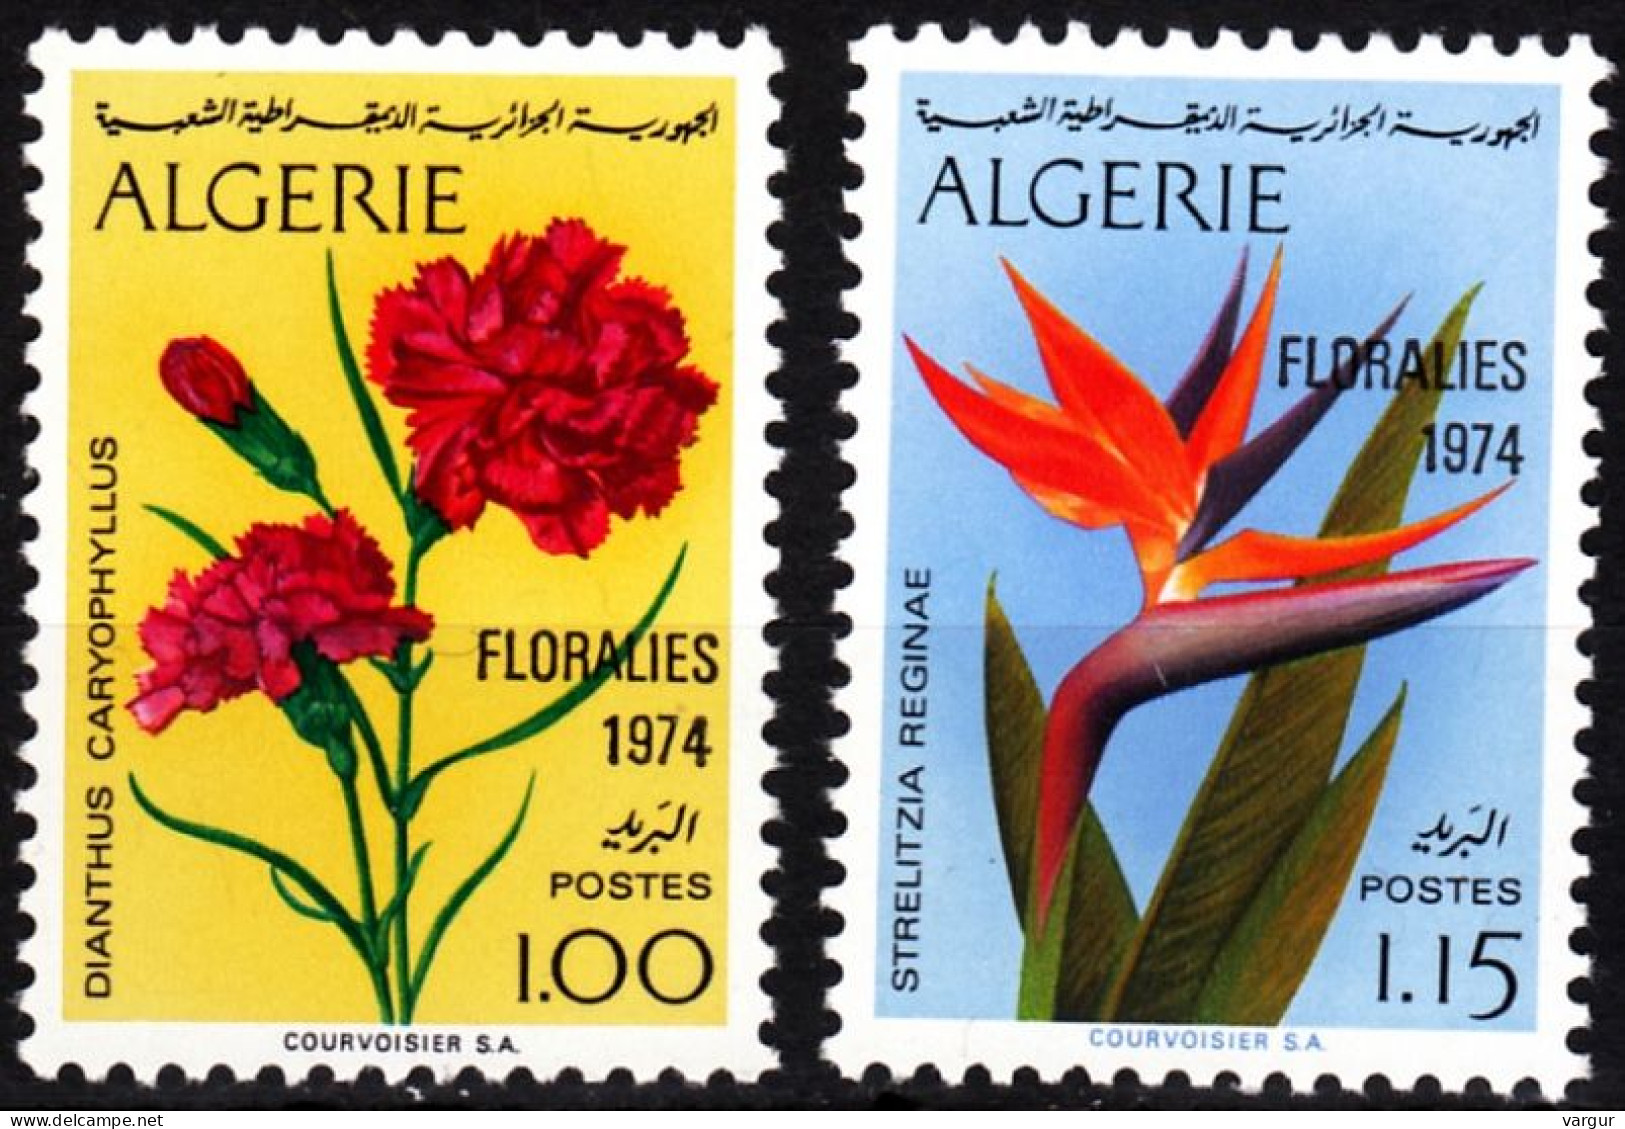 ALGERIA 1974 Flowers. Pink Orchid, Overprinted. Complete, MNH - Orchids